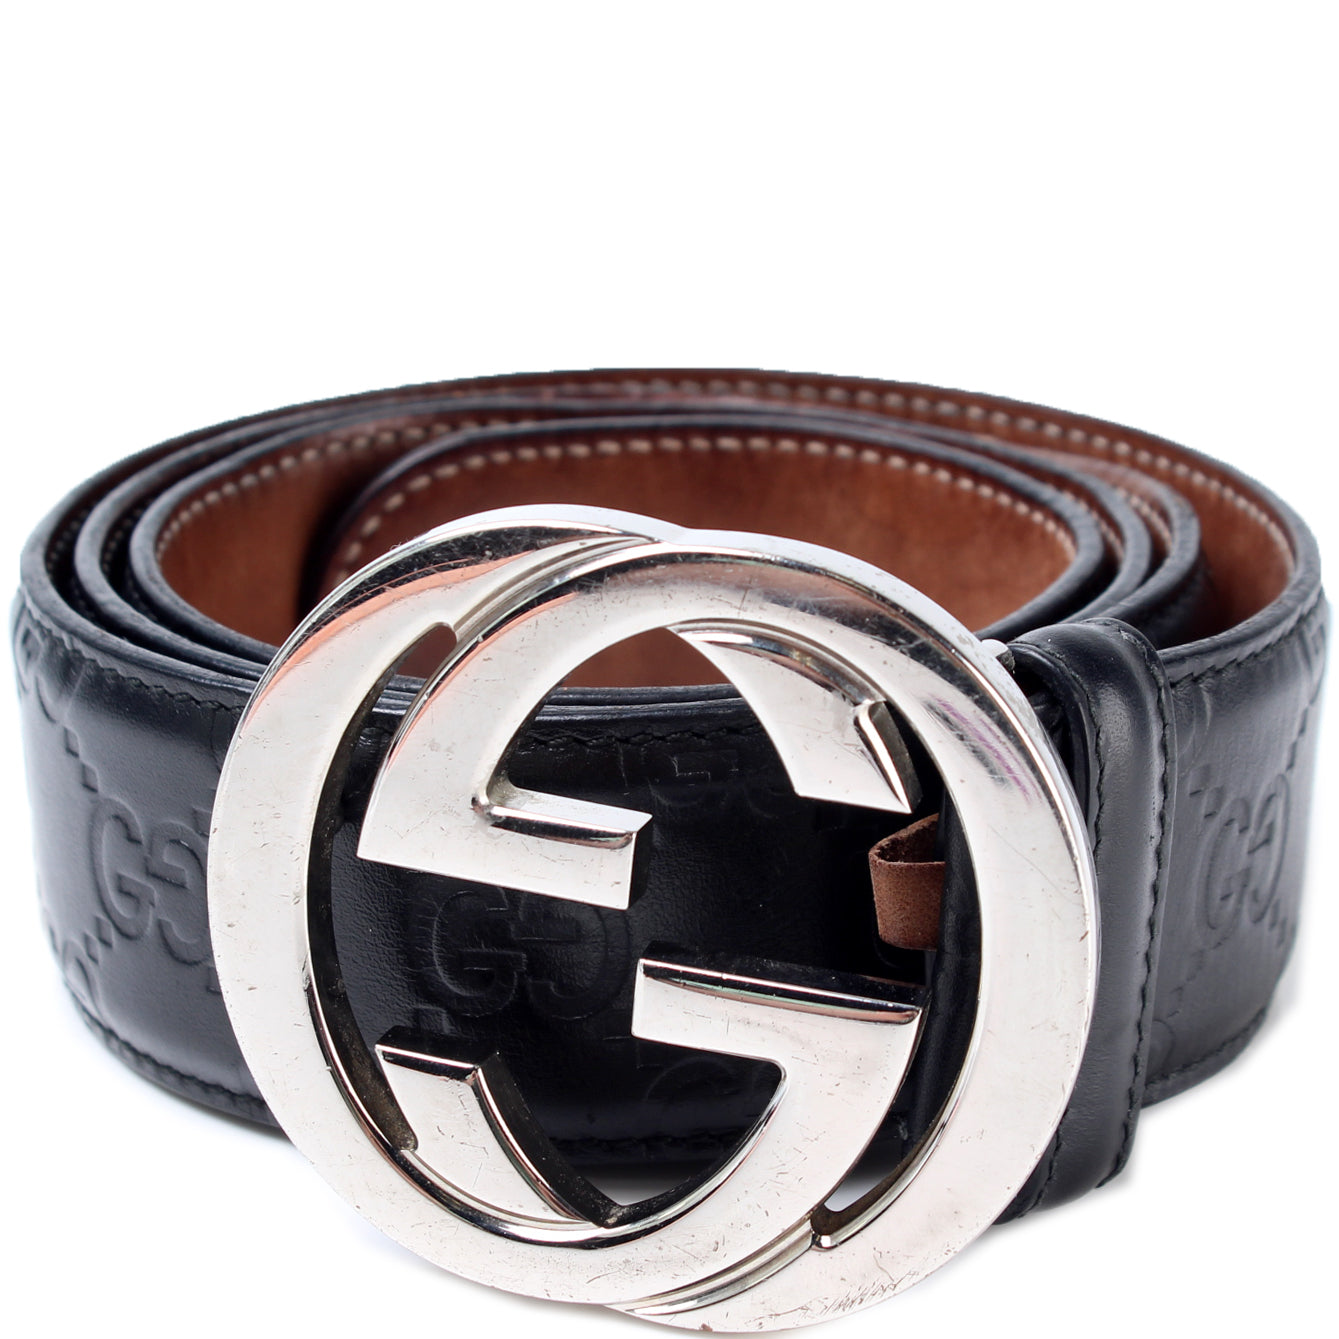 Gucci Guccissima leather GG Buckle Belt 90